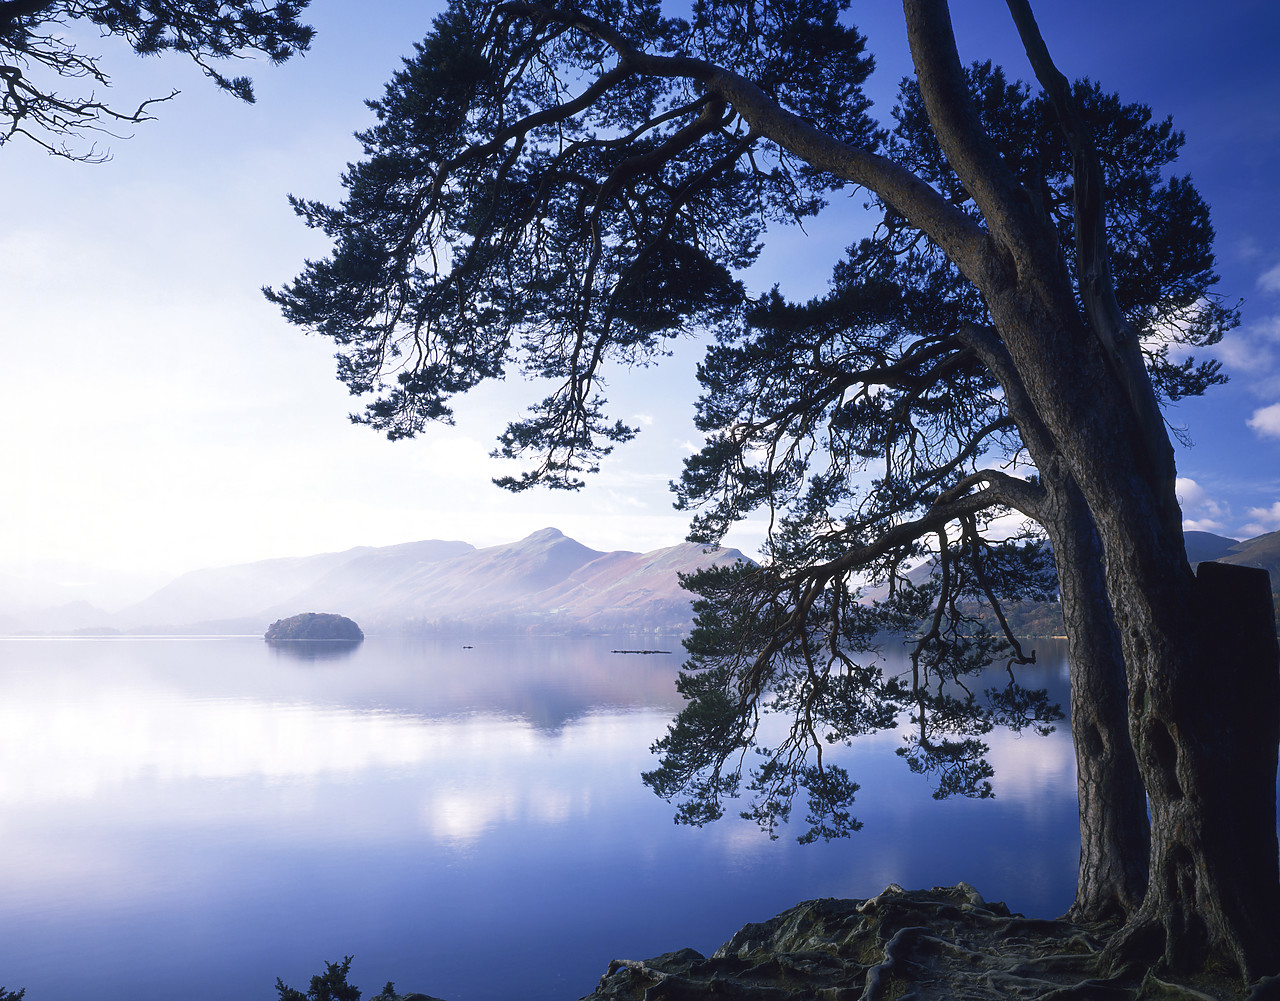 #892559-1 - Derwent Water from Friar's Crag, Lake District National Park, Cumbria, England